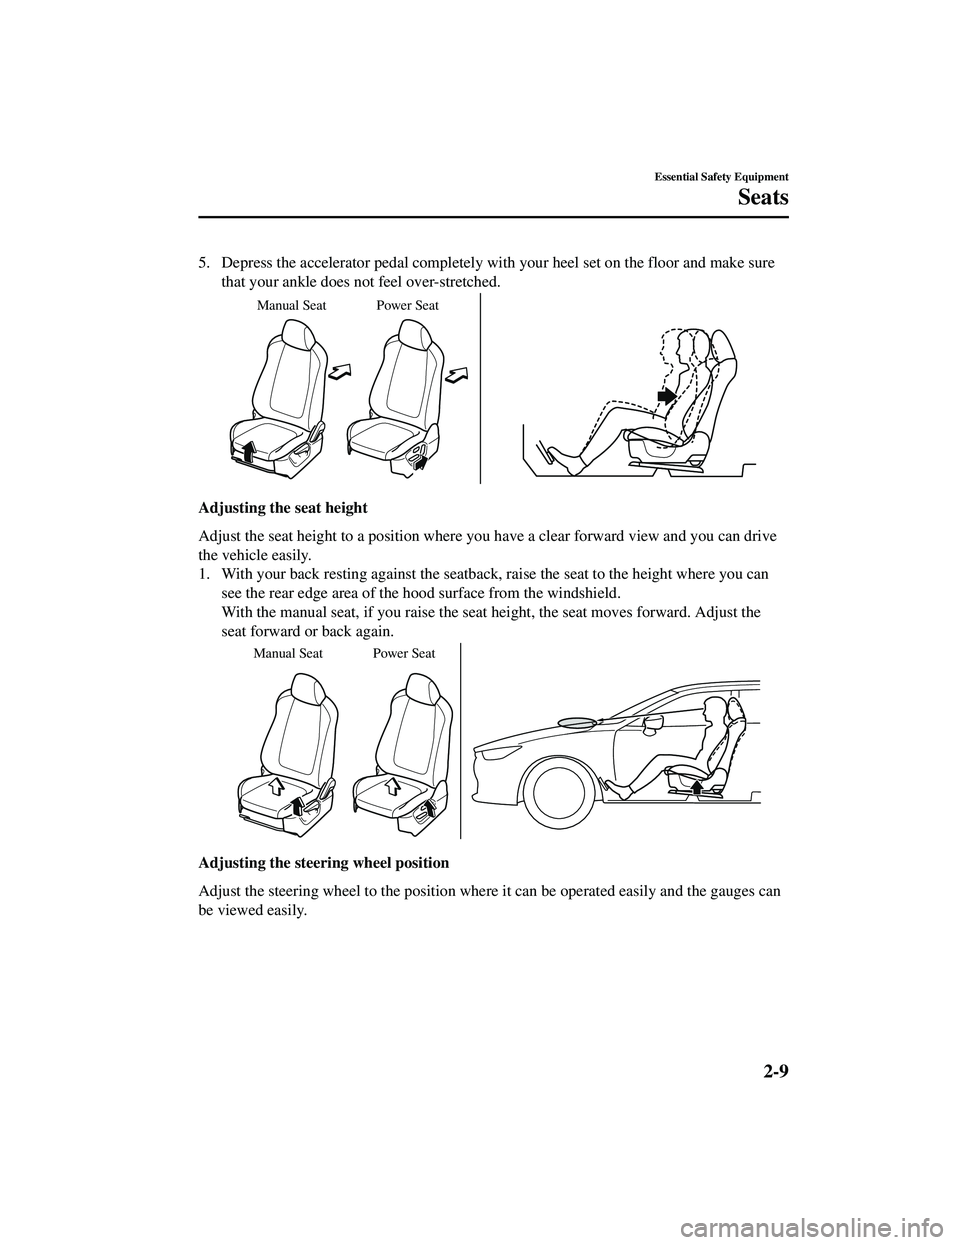 MAZDA MODEL CX-9 2021 Owners Manual 5. Depress the accelerator pedal completely with your heel set on the floor and make surethat your ankle does not feel over-stretched.
Manual Seat Power Seat
Adjusting the seat height
Adjust the seat 